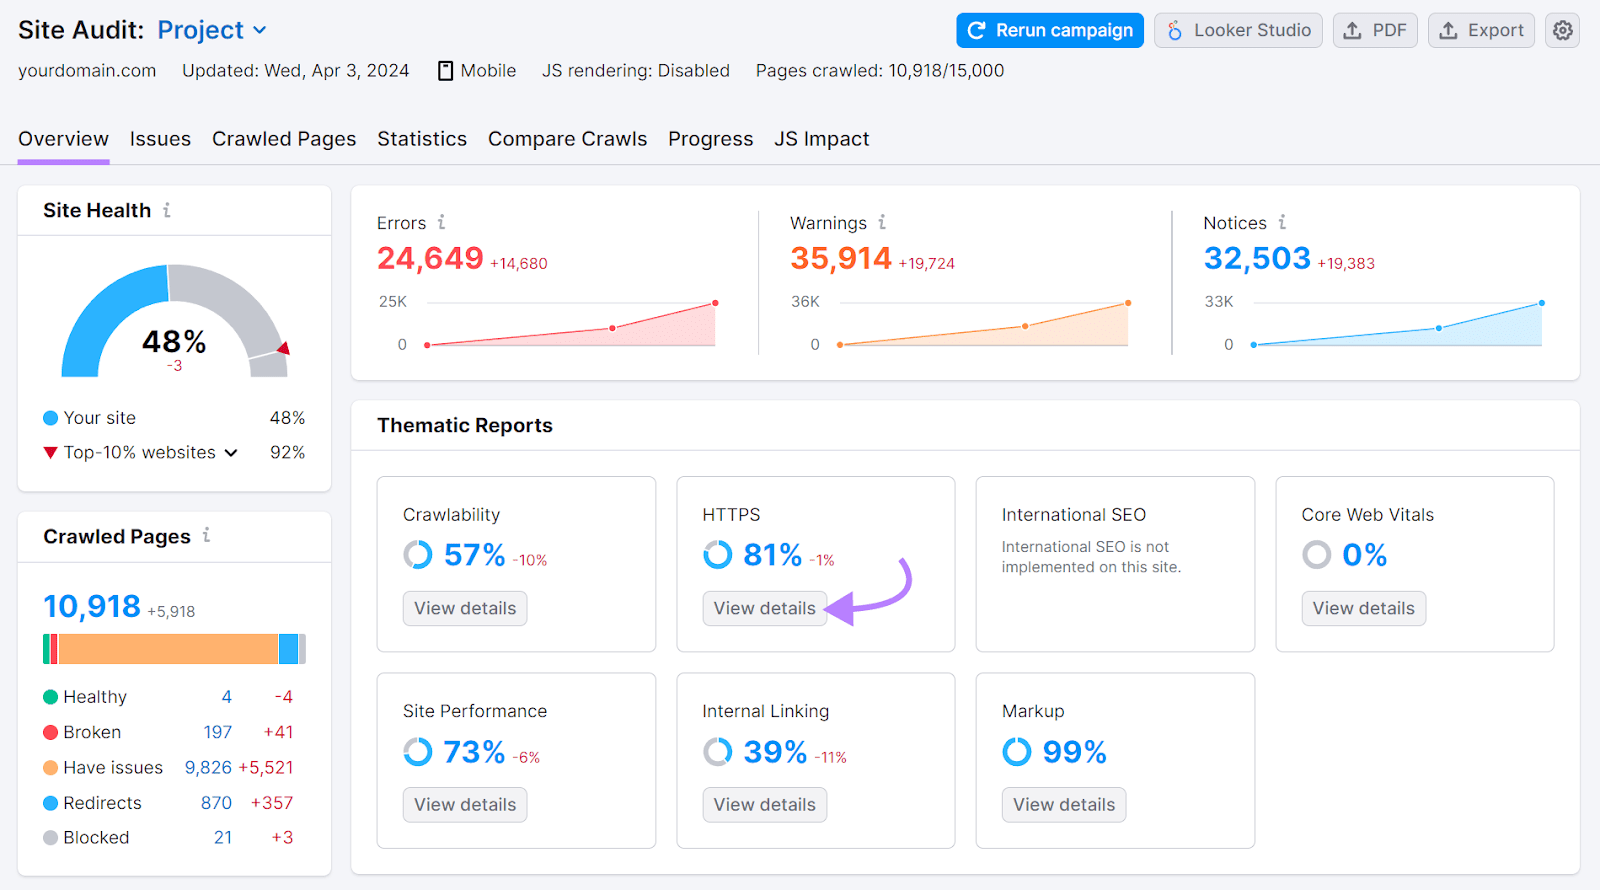 HTTPS implementation widget showing 81% successful  Site Audit's overview dashboard